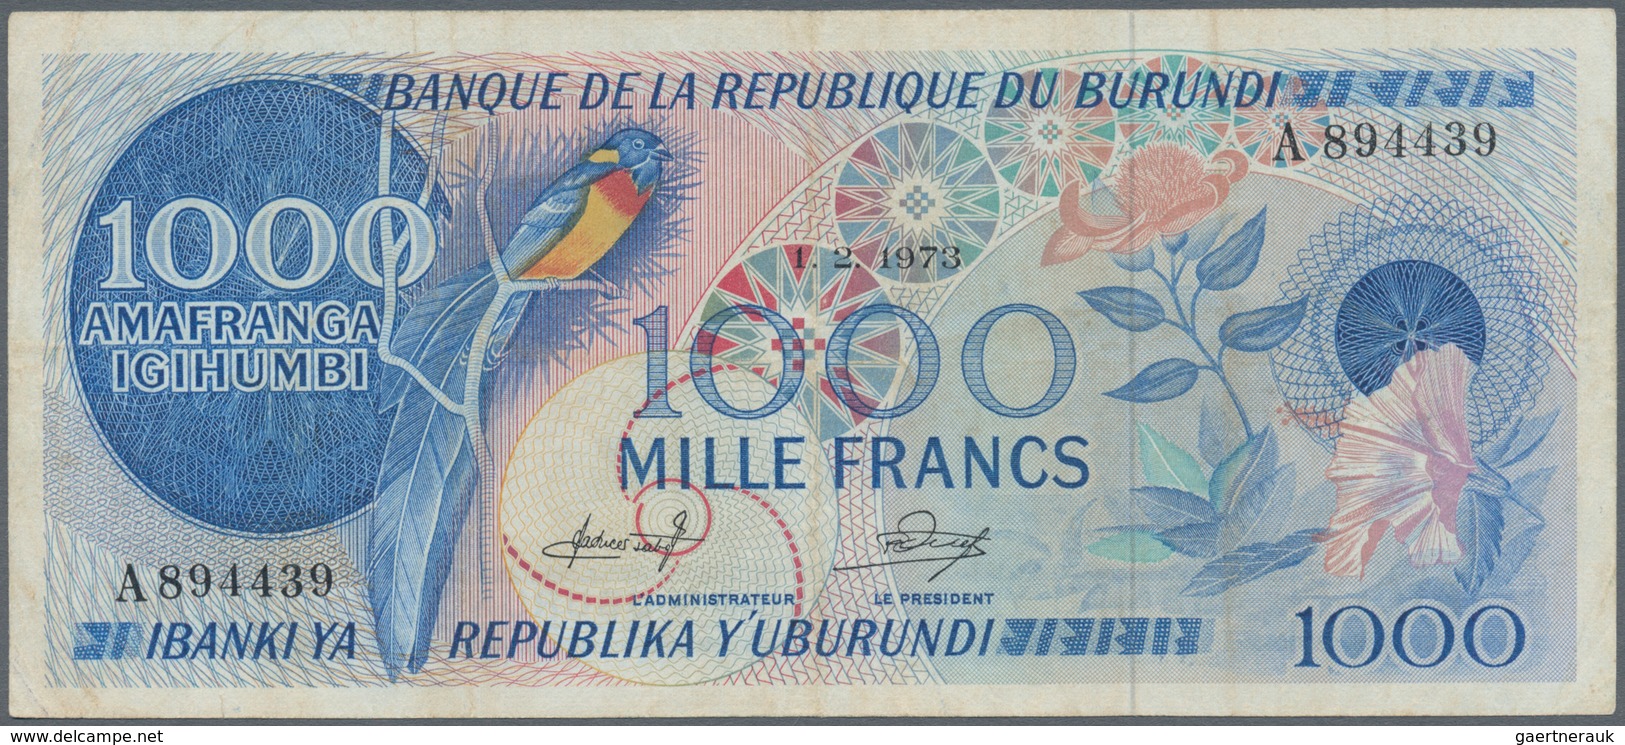 Burundi: 1000 Francs 1973 P. 25a, Used With Folds, Pressed, No Holes Or Tears, Still Strongness In P - Burundi